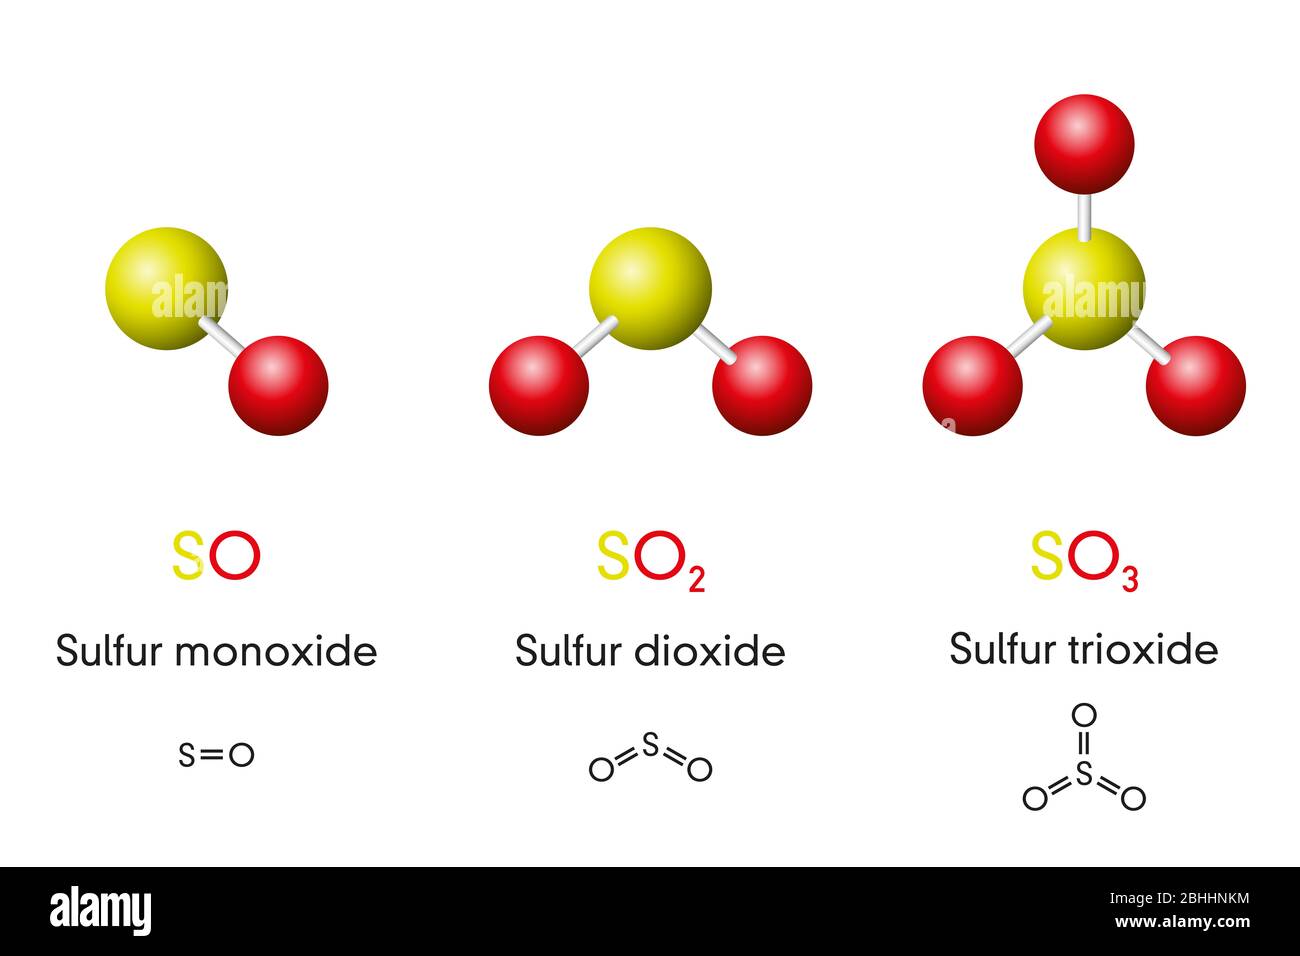 Three sulfur oxides, molecule models and chemical formulas. Sulfur monoxide, dioxide and trioxide, SO, SO2, SO3. Ball-and-stick models. Stock Photo